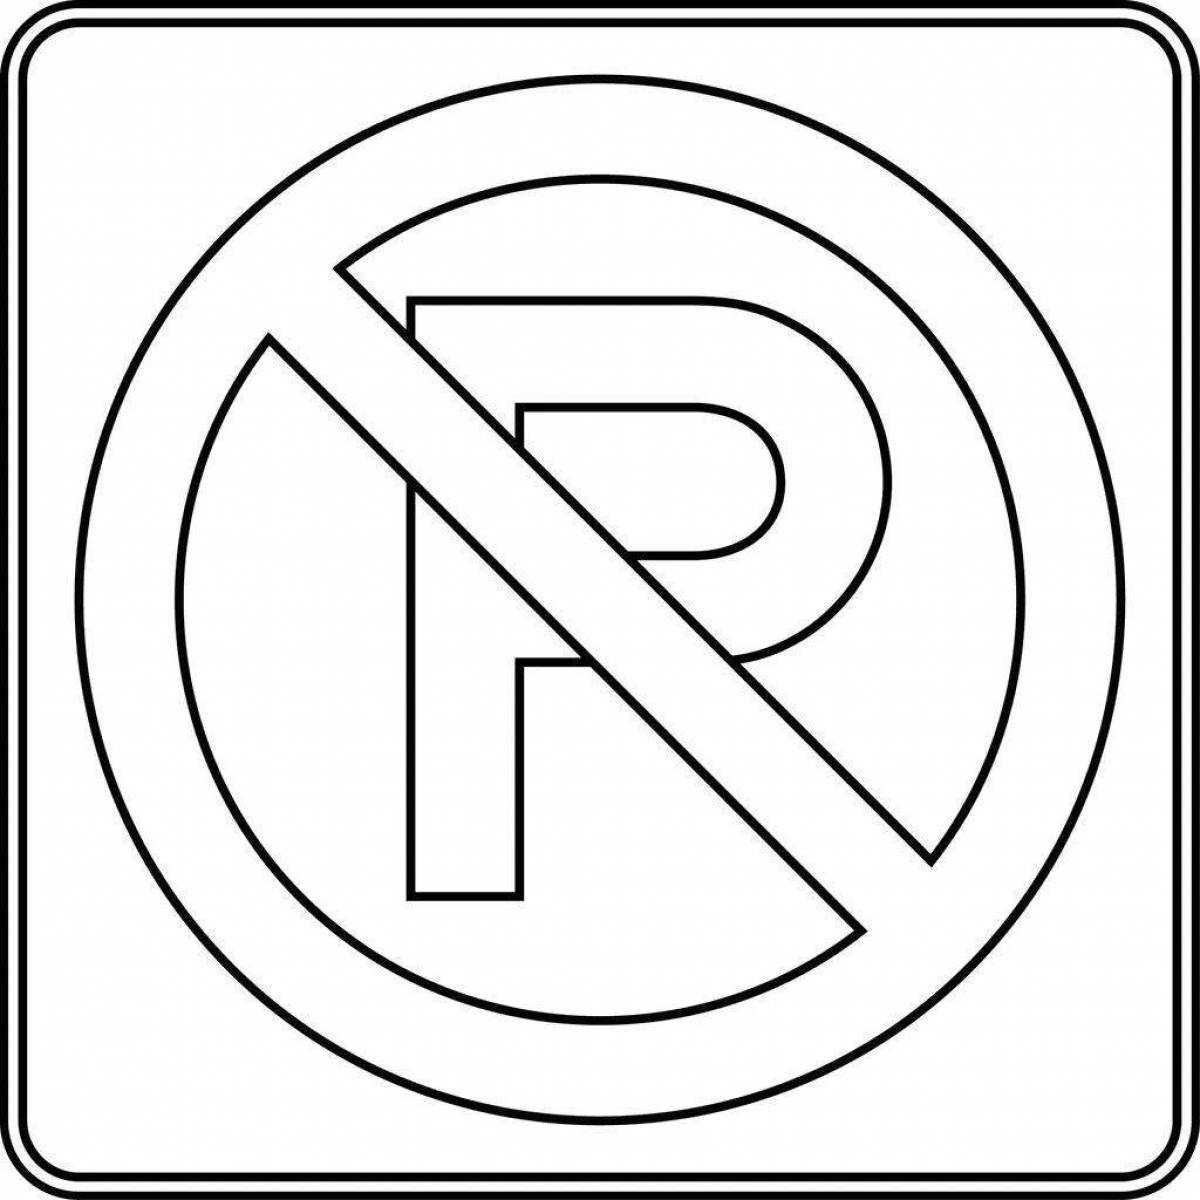 Coloring page mysterious road sign